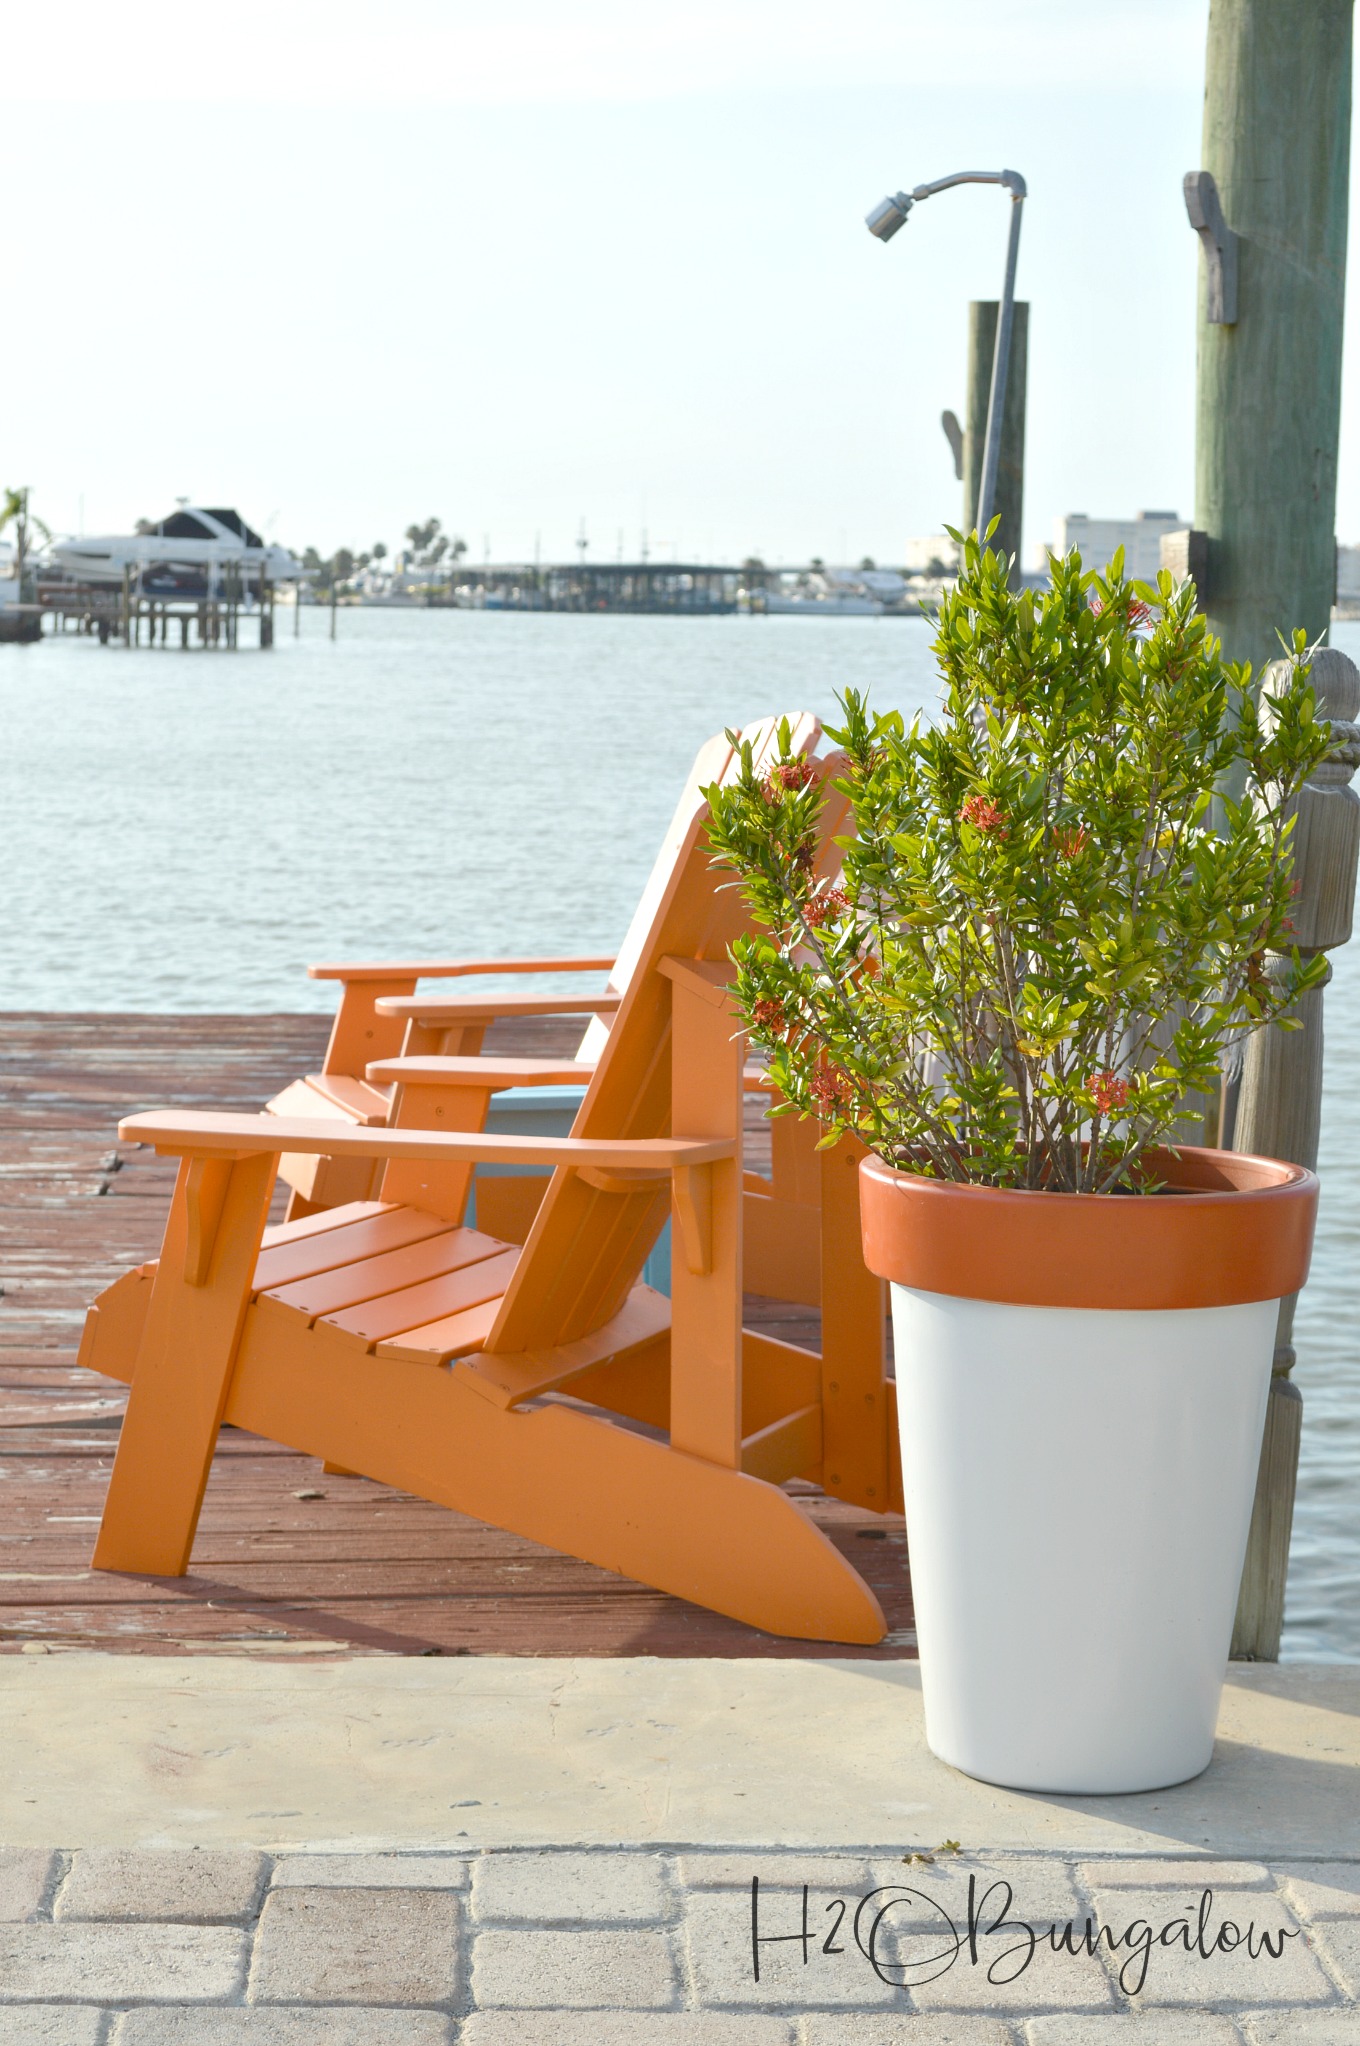 White planter with orange rim sitting next to orange Adirondack chairs on a dock by the water.